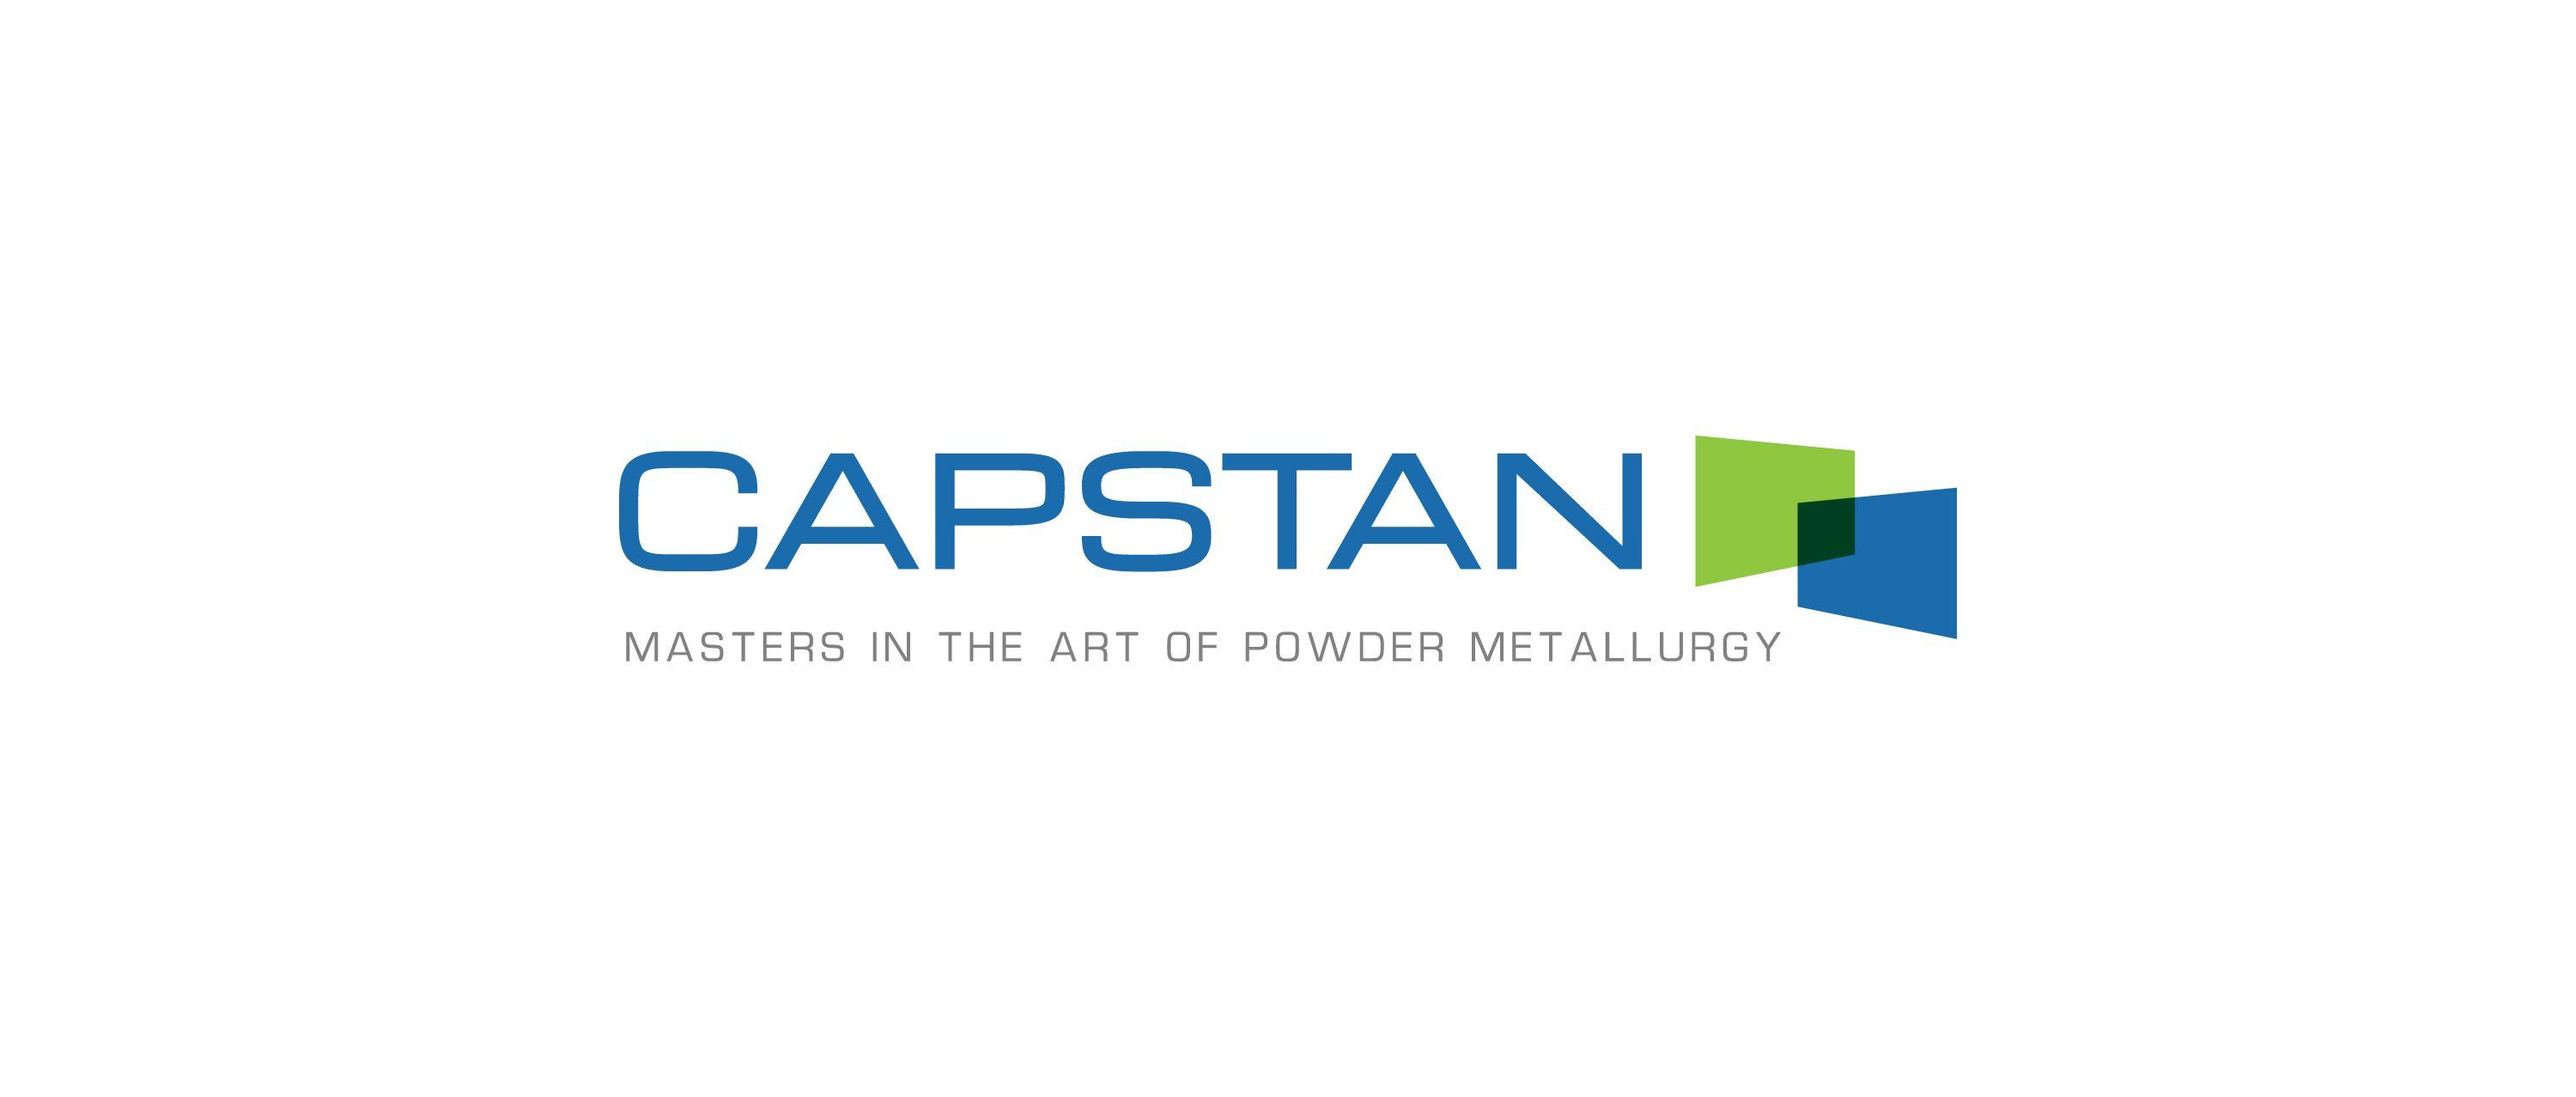 Most Recognized Company Logo - Capstan Introduces A New Logo. Capstan, Inc